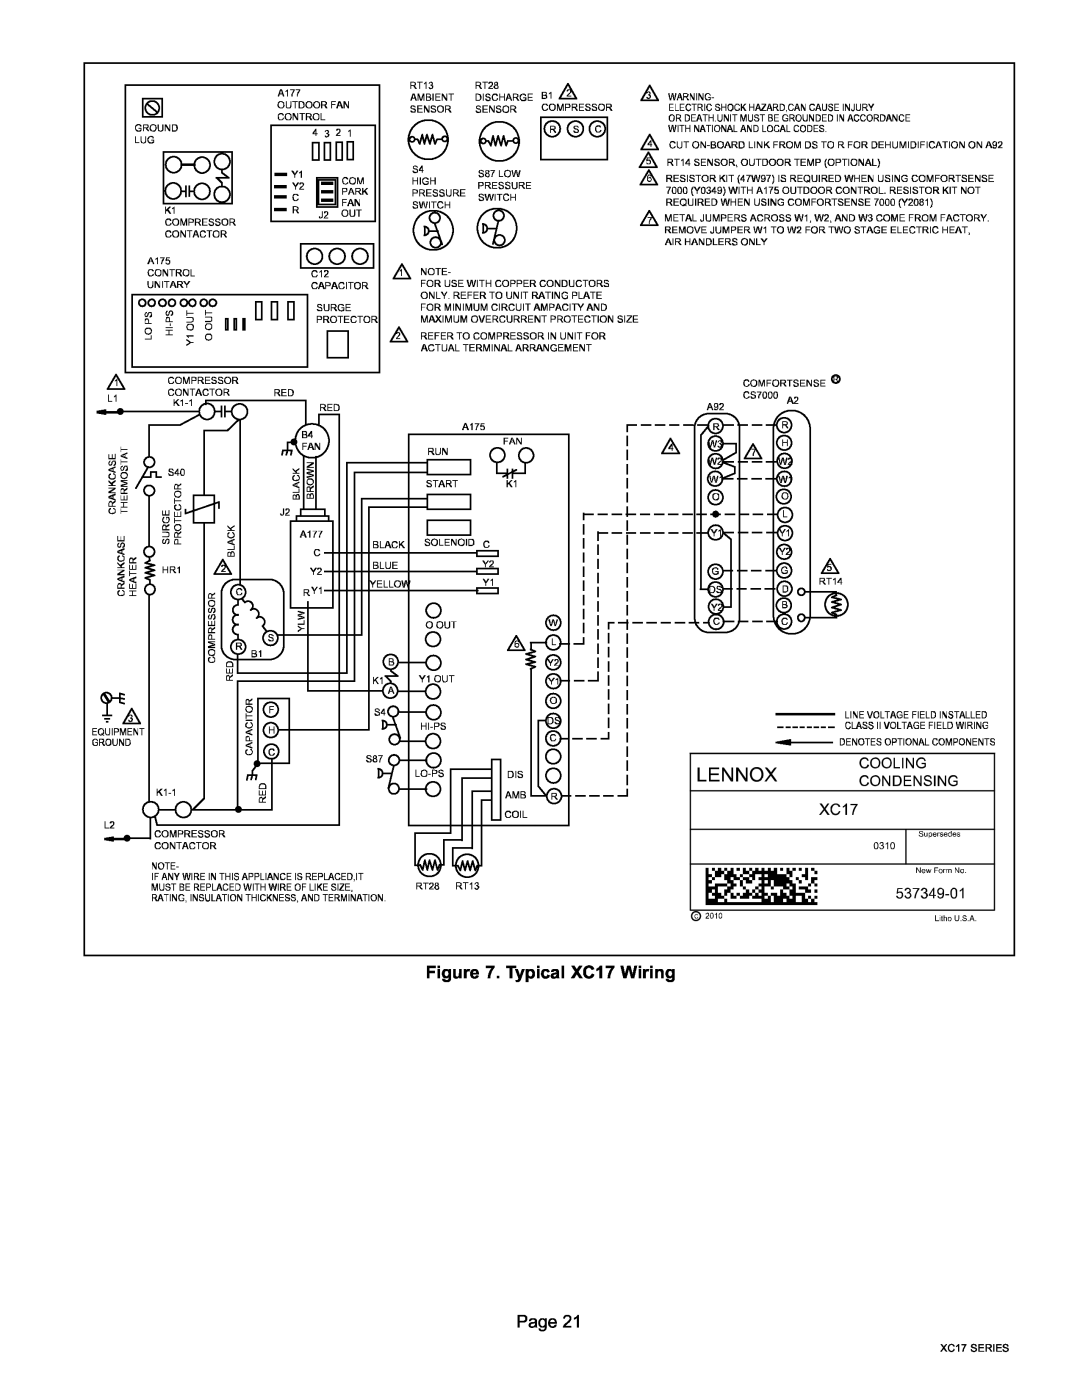 Lennox International Inc Dave Lennox Signature Collection XC17 Air Conditioner Typical XC17 Wiring, Page, XC17 SERIES 